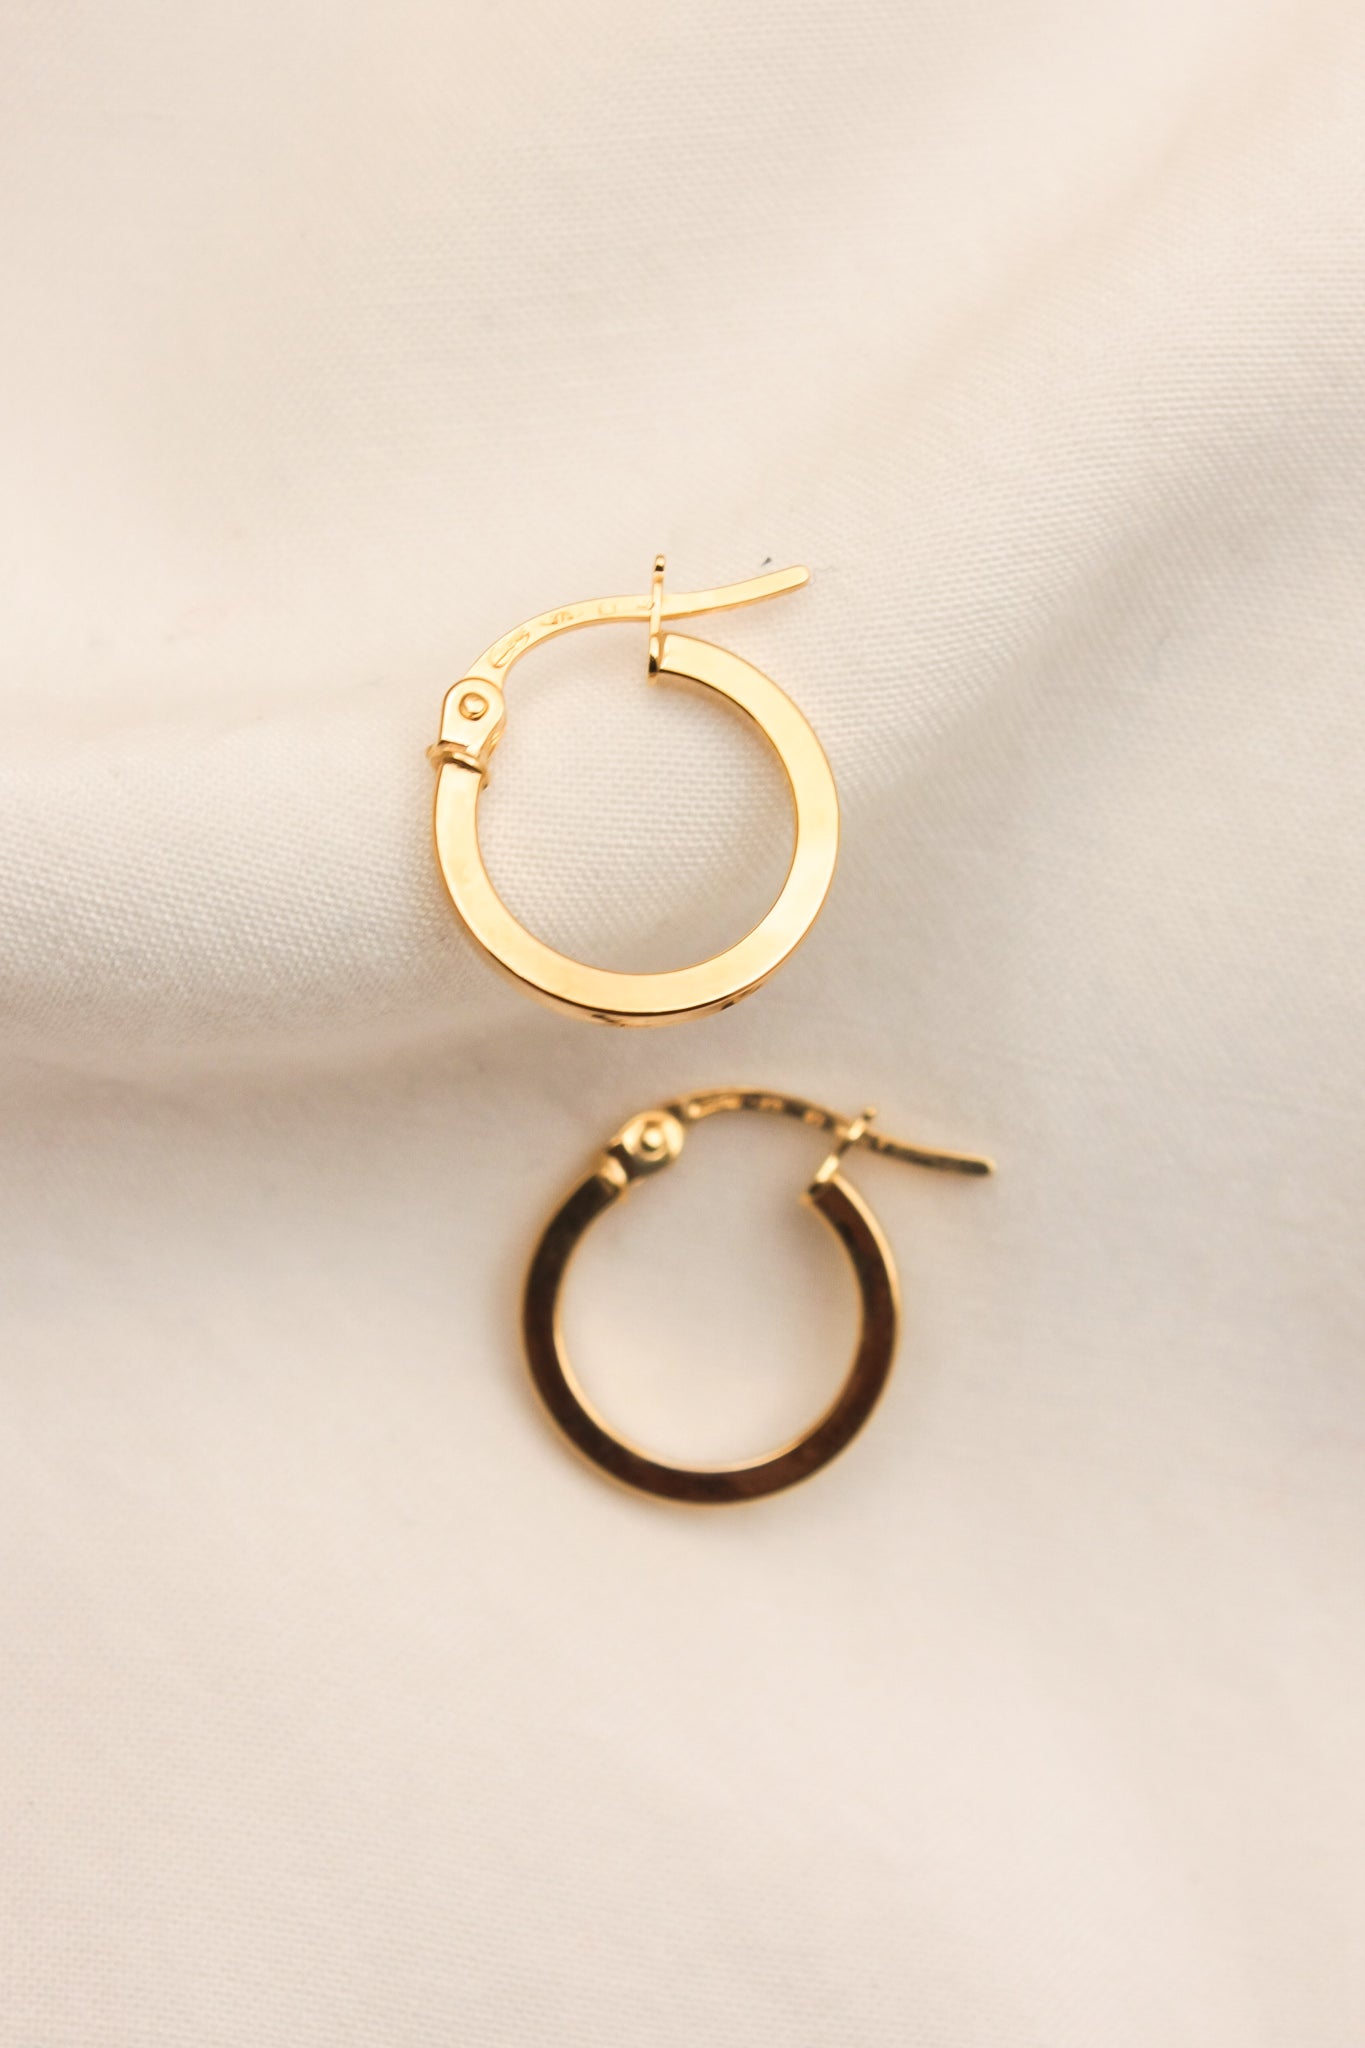 LORNE 9ct Yellow Gold 10mm Hoop Earring—a minimalist's dream of clean lines and reflective surfaces.  Features:  Precious Metal: Crafted from solid 9ct yellow gold with a prominent 375 stamp. Clean and Reflective: Chosen for its clean lines and reflective surfaces, this earring embodies minimalist elegance at its finest.